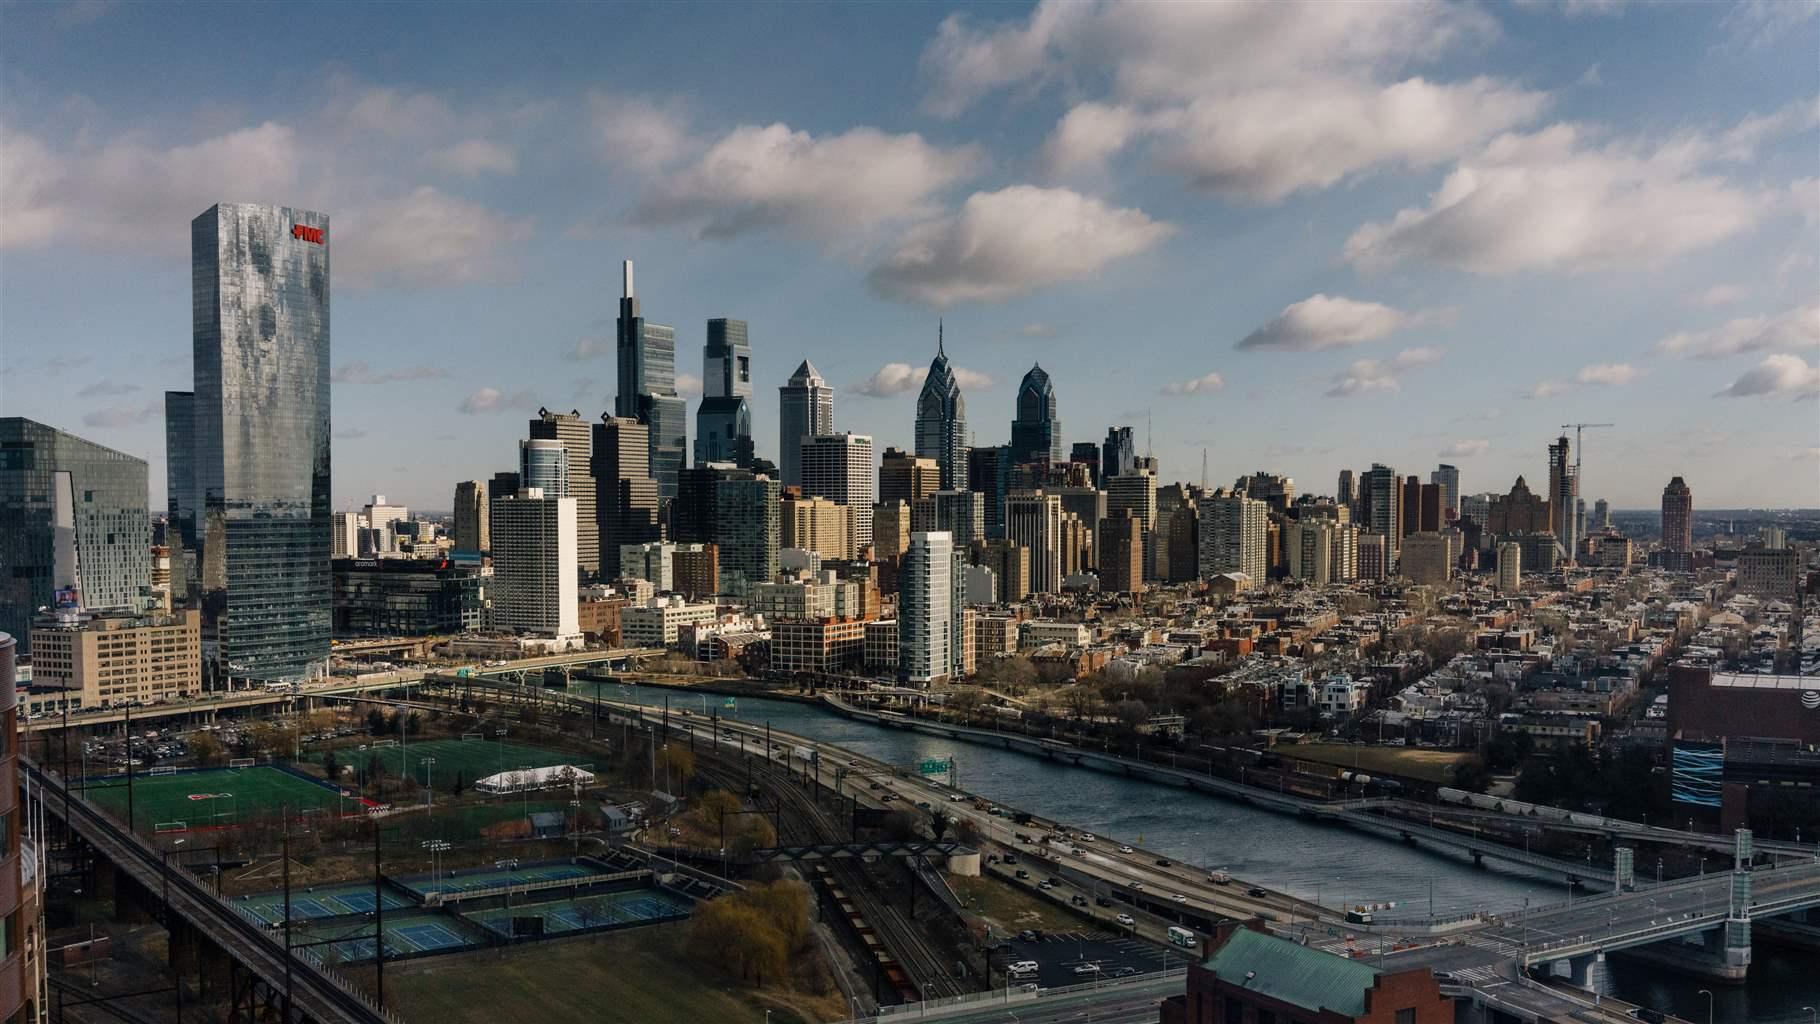 A view of Philadelphia, Pa., west of the Schuylkill River on January 29, 2021